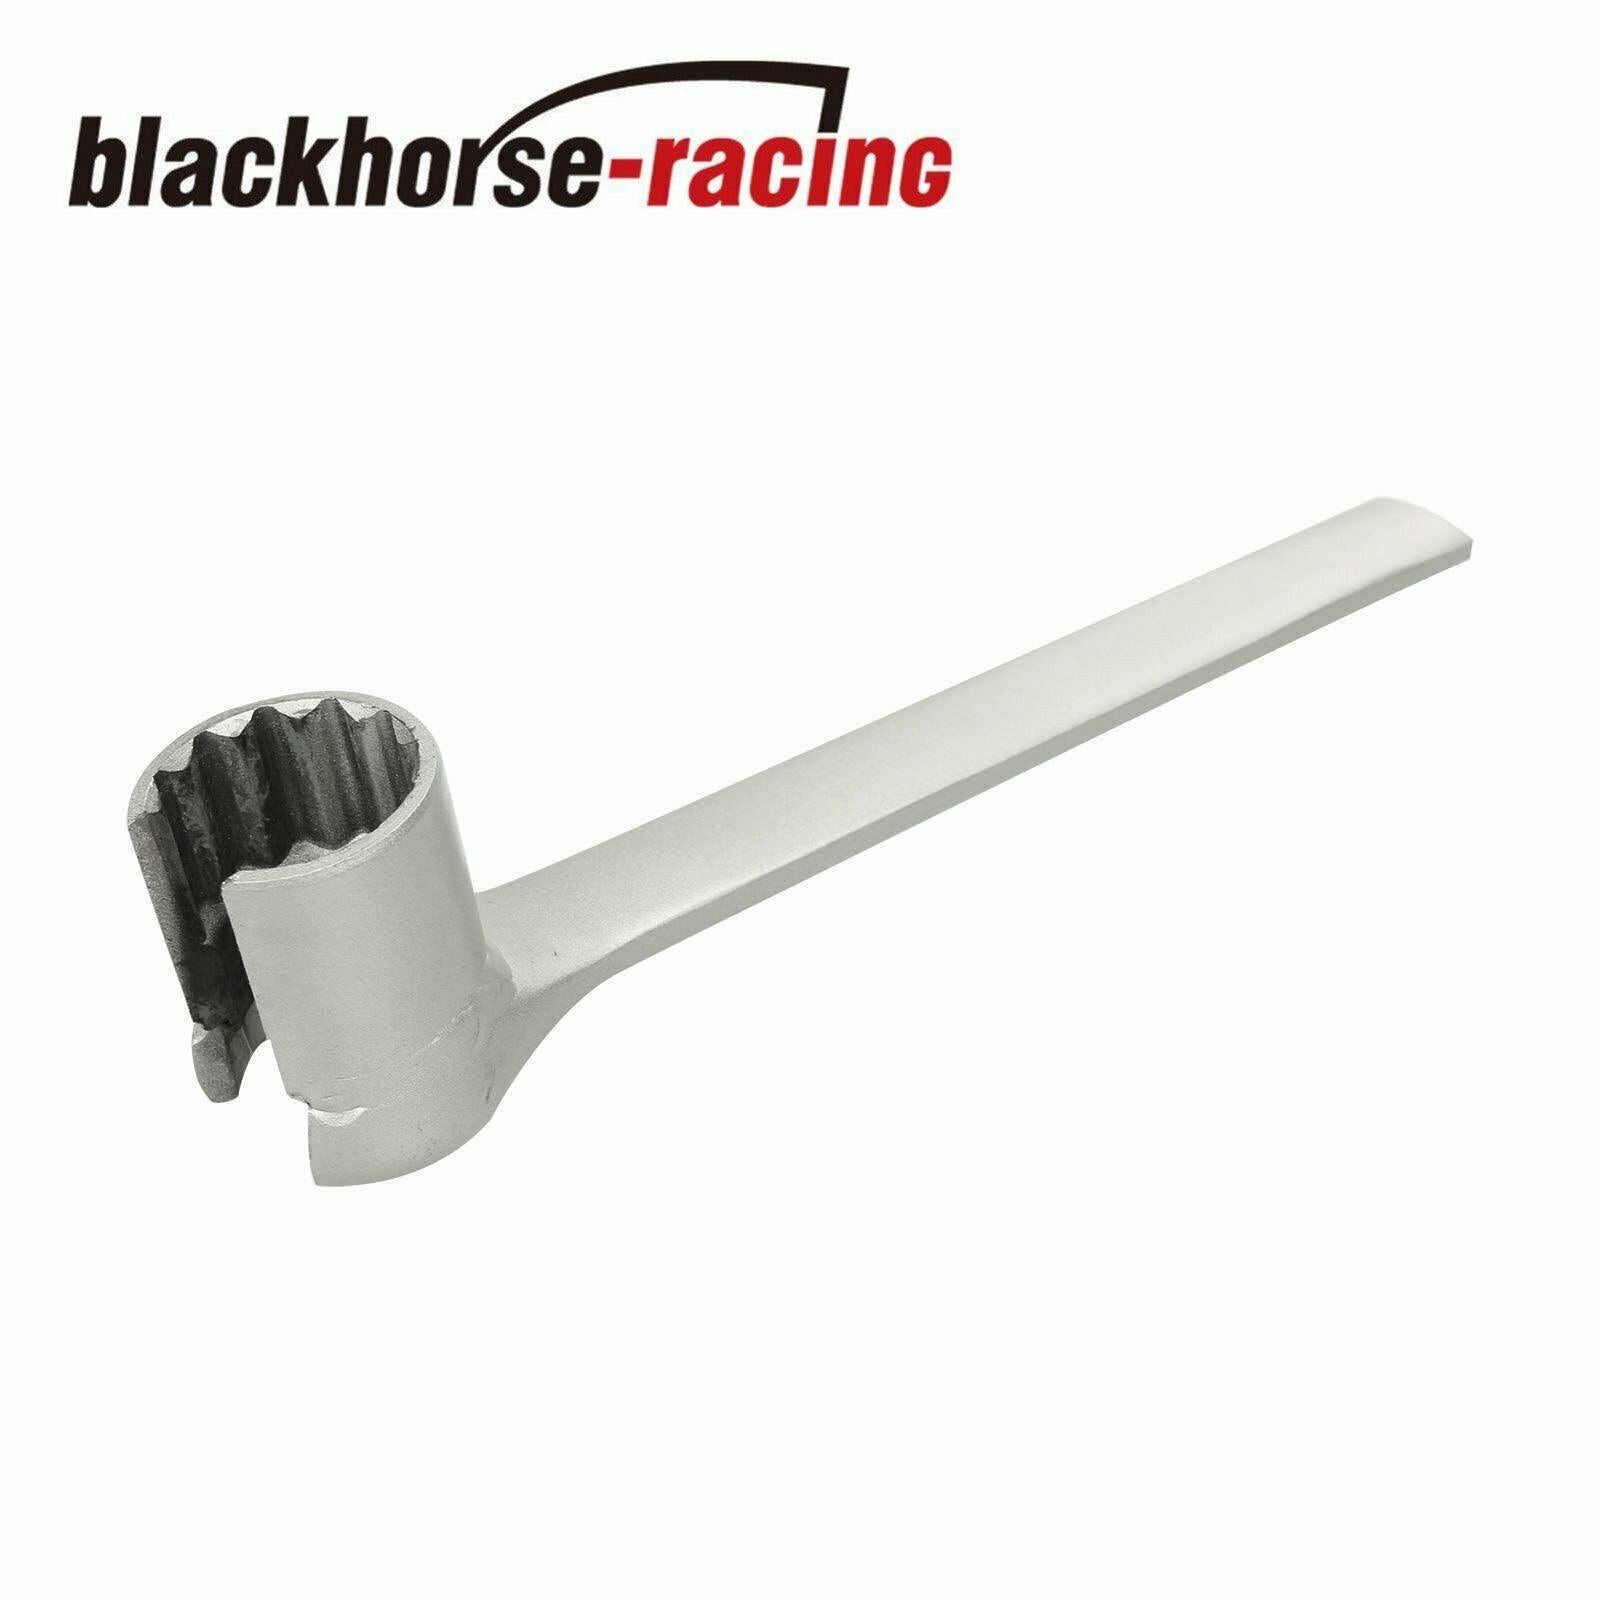 For Ford 7.3 7.3L POWERSTROKE IPR VALVE REMOVAL TOOL - www.blackhorse-racing.com